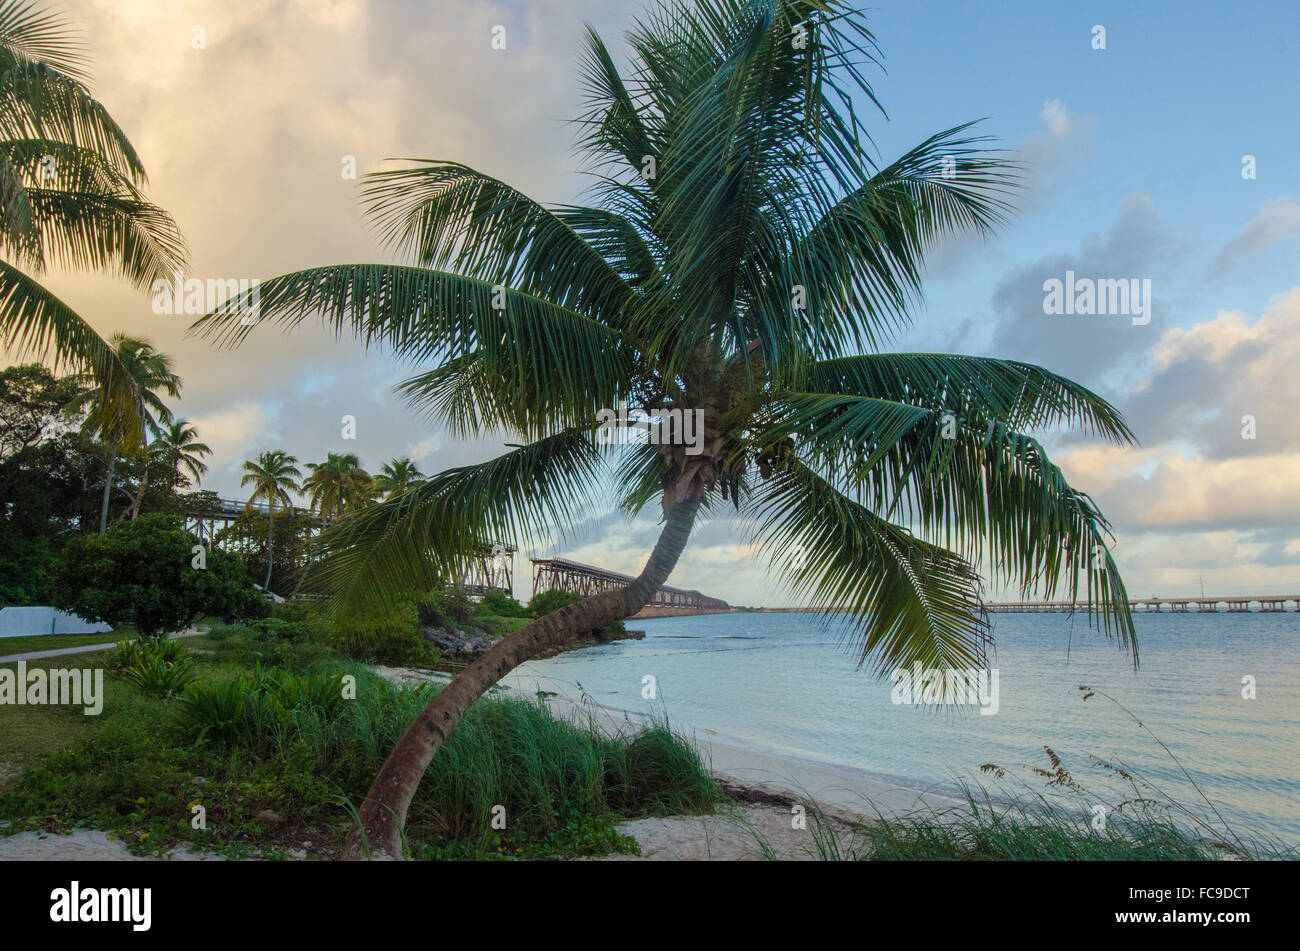 Early morning gusts sway tropical greenery on the rim of a slender beach. Stock Photo